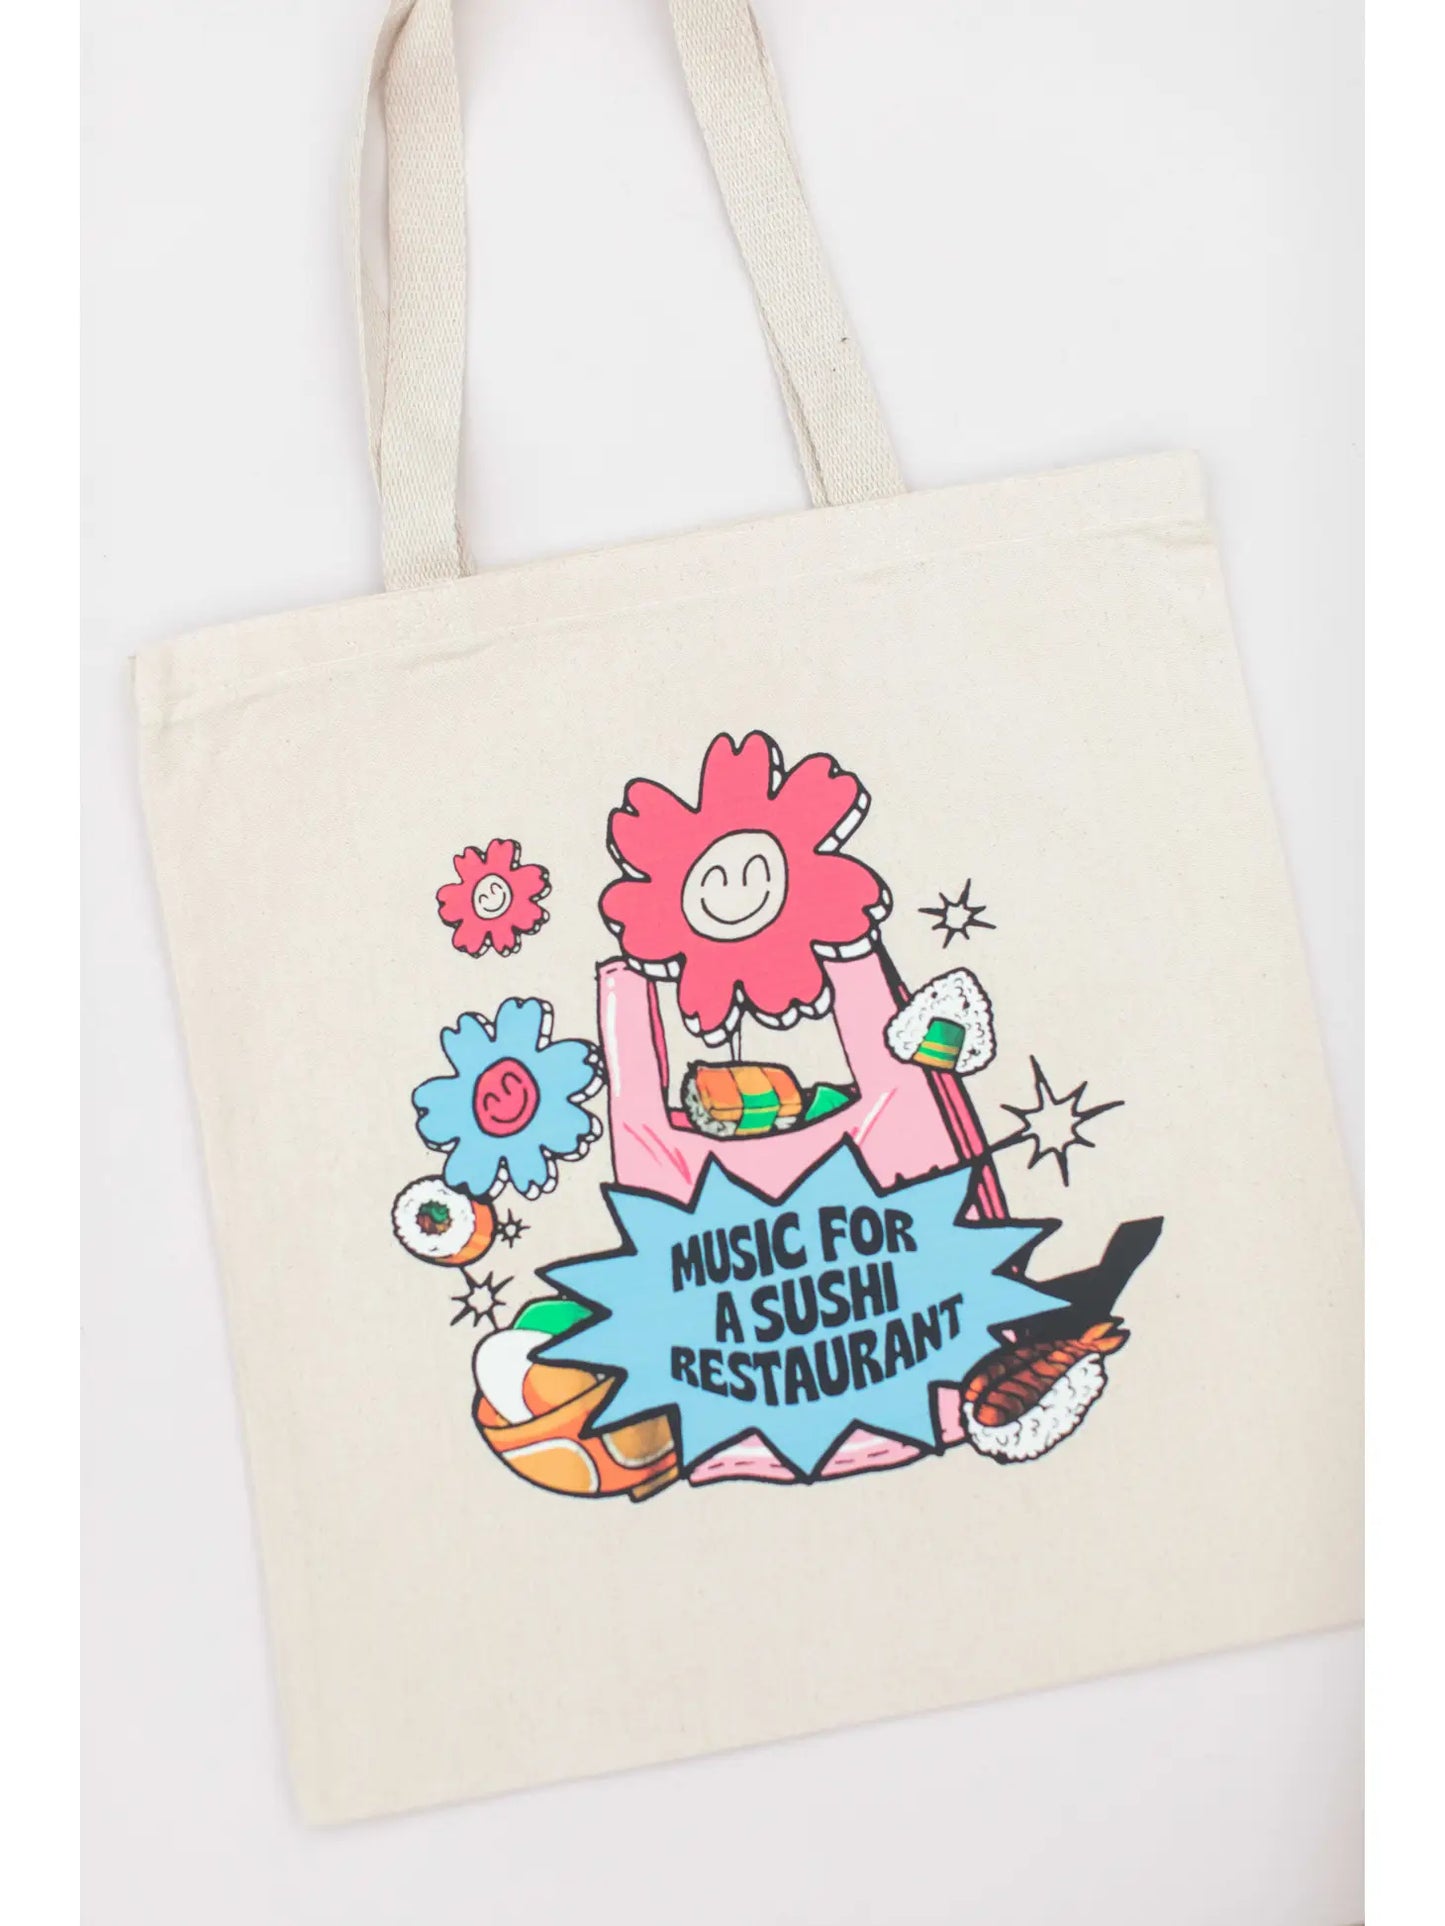 Harry's "Music for Sushi" Tote Bag